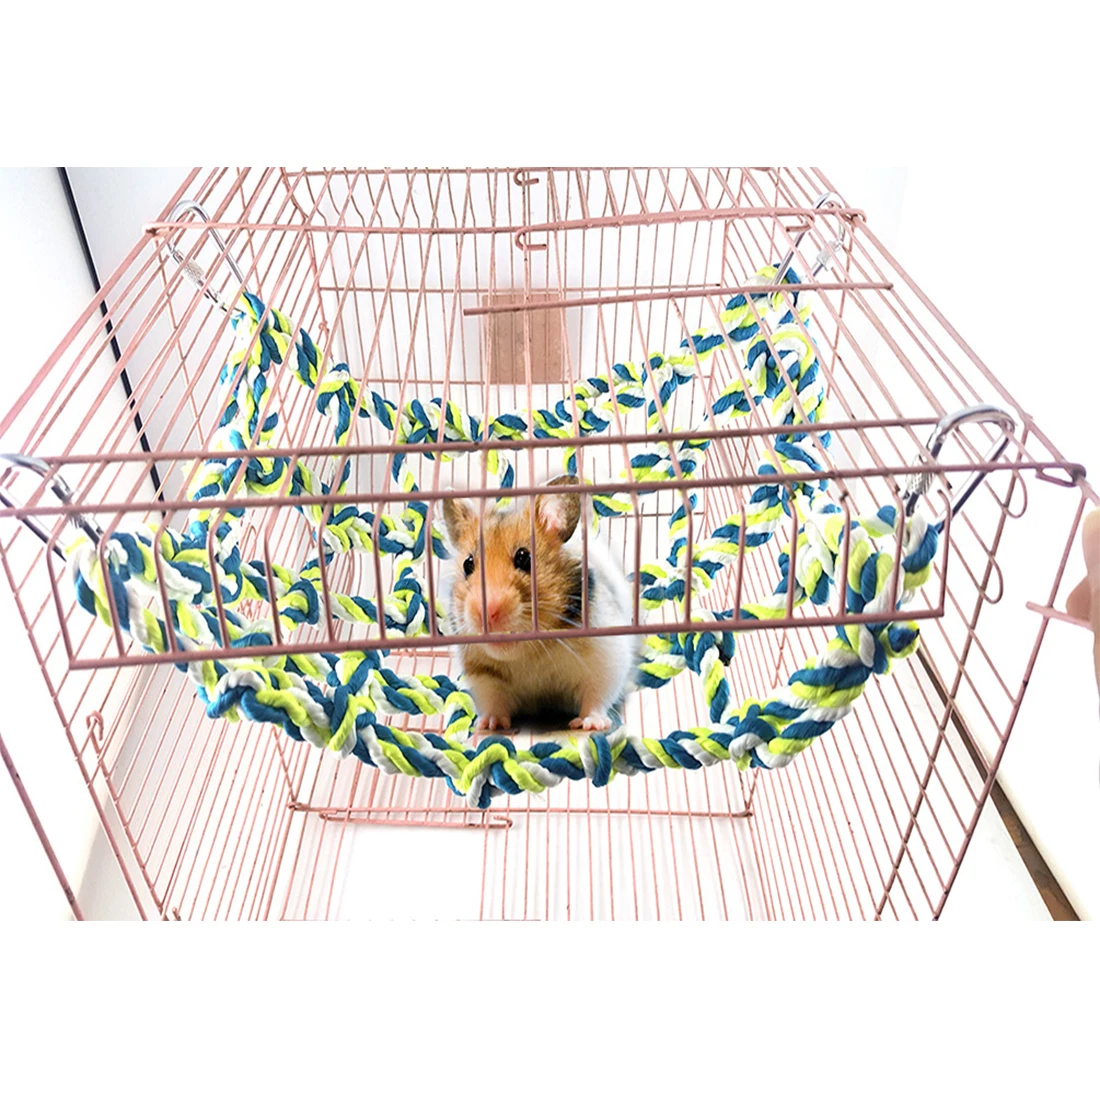 LXJLWJB Parrot Climbing Ladder Cotton Rope Net Cage Hanging Pet Activity Toy for Hamster Ferret Small Animal-in Bird Toys from Home 